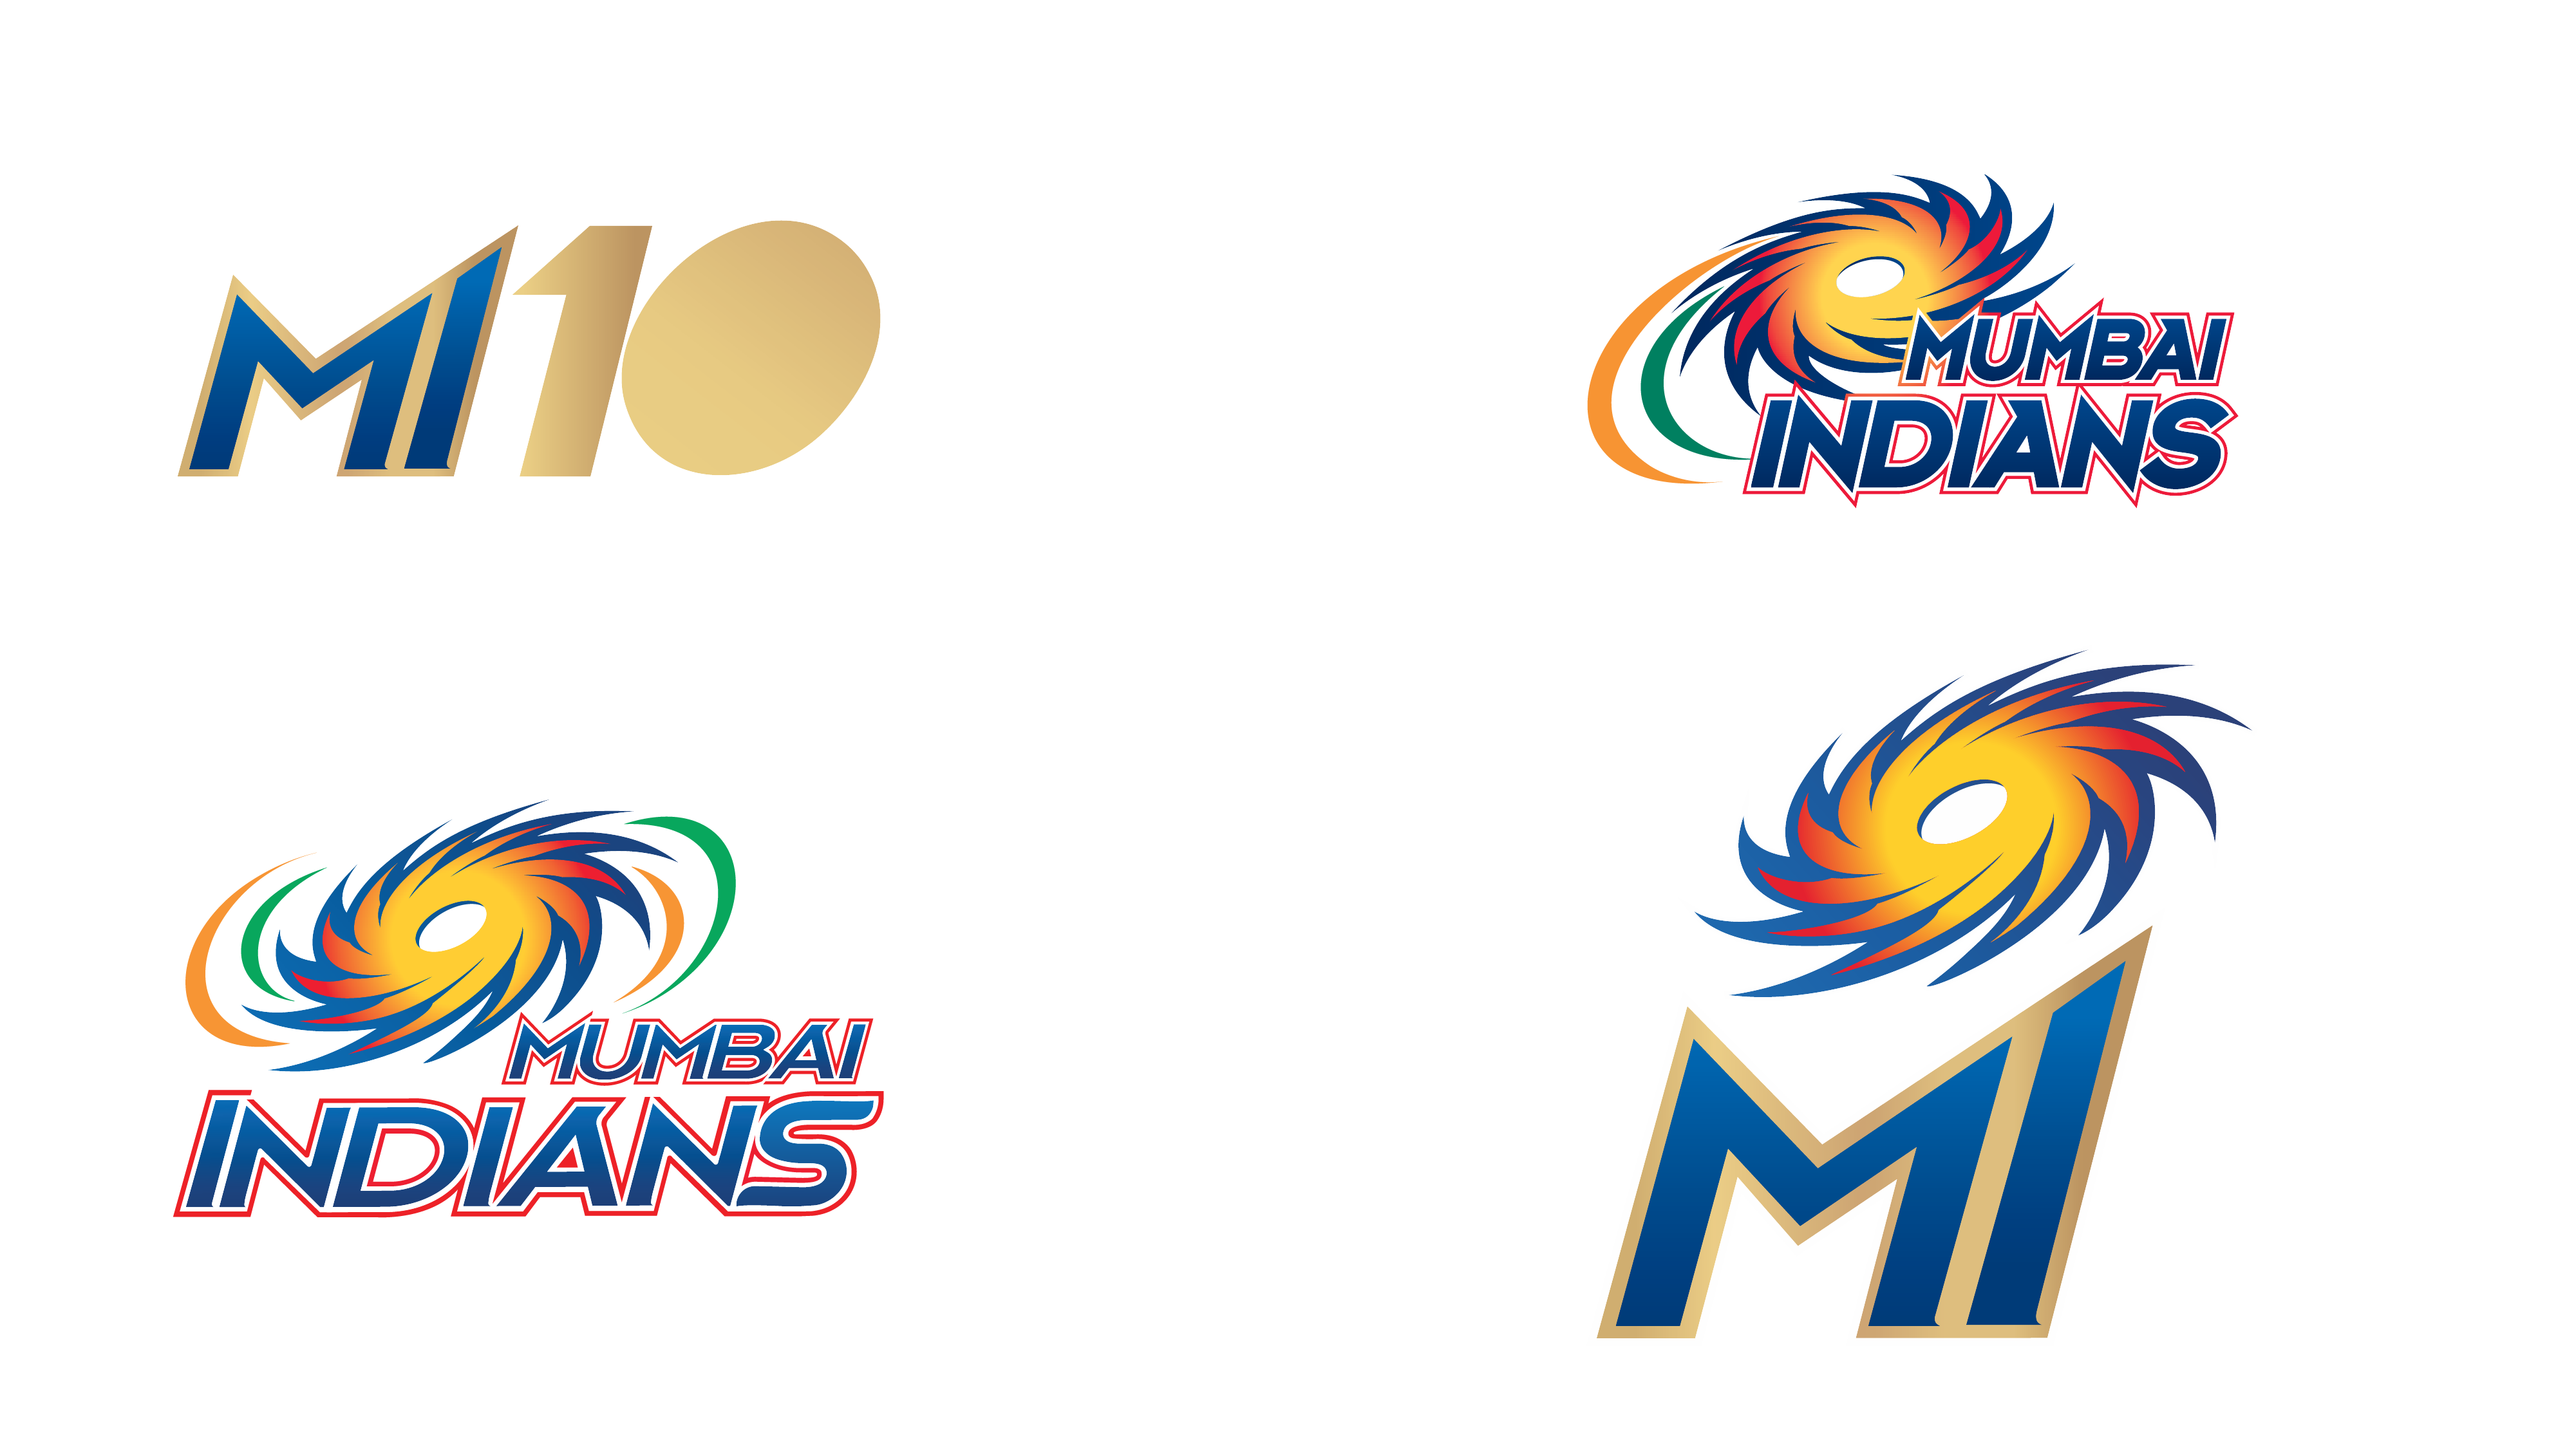 Mumbai Indians wallpaper by anee_007 - Download on ZEDGE™ | 7882-cheohanoi.vn